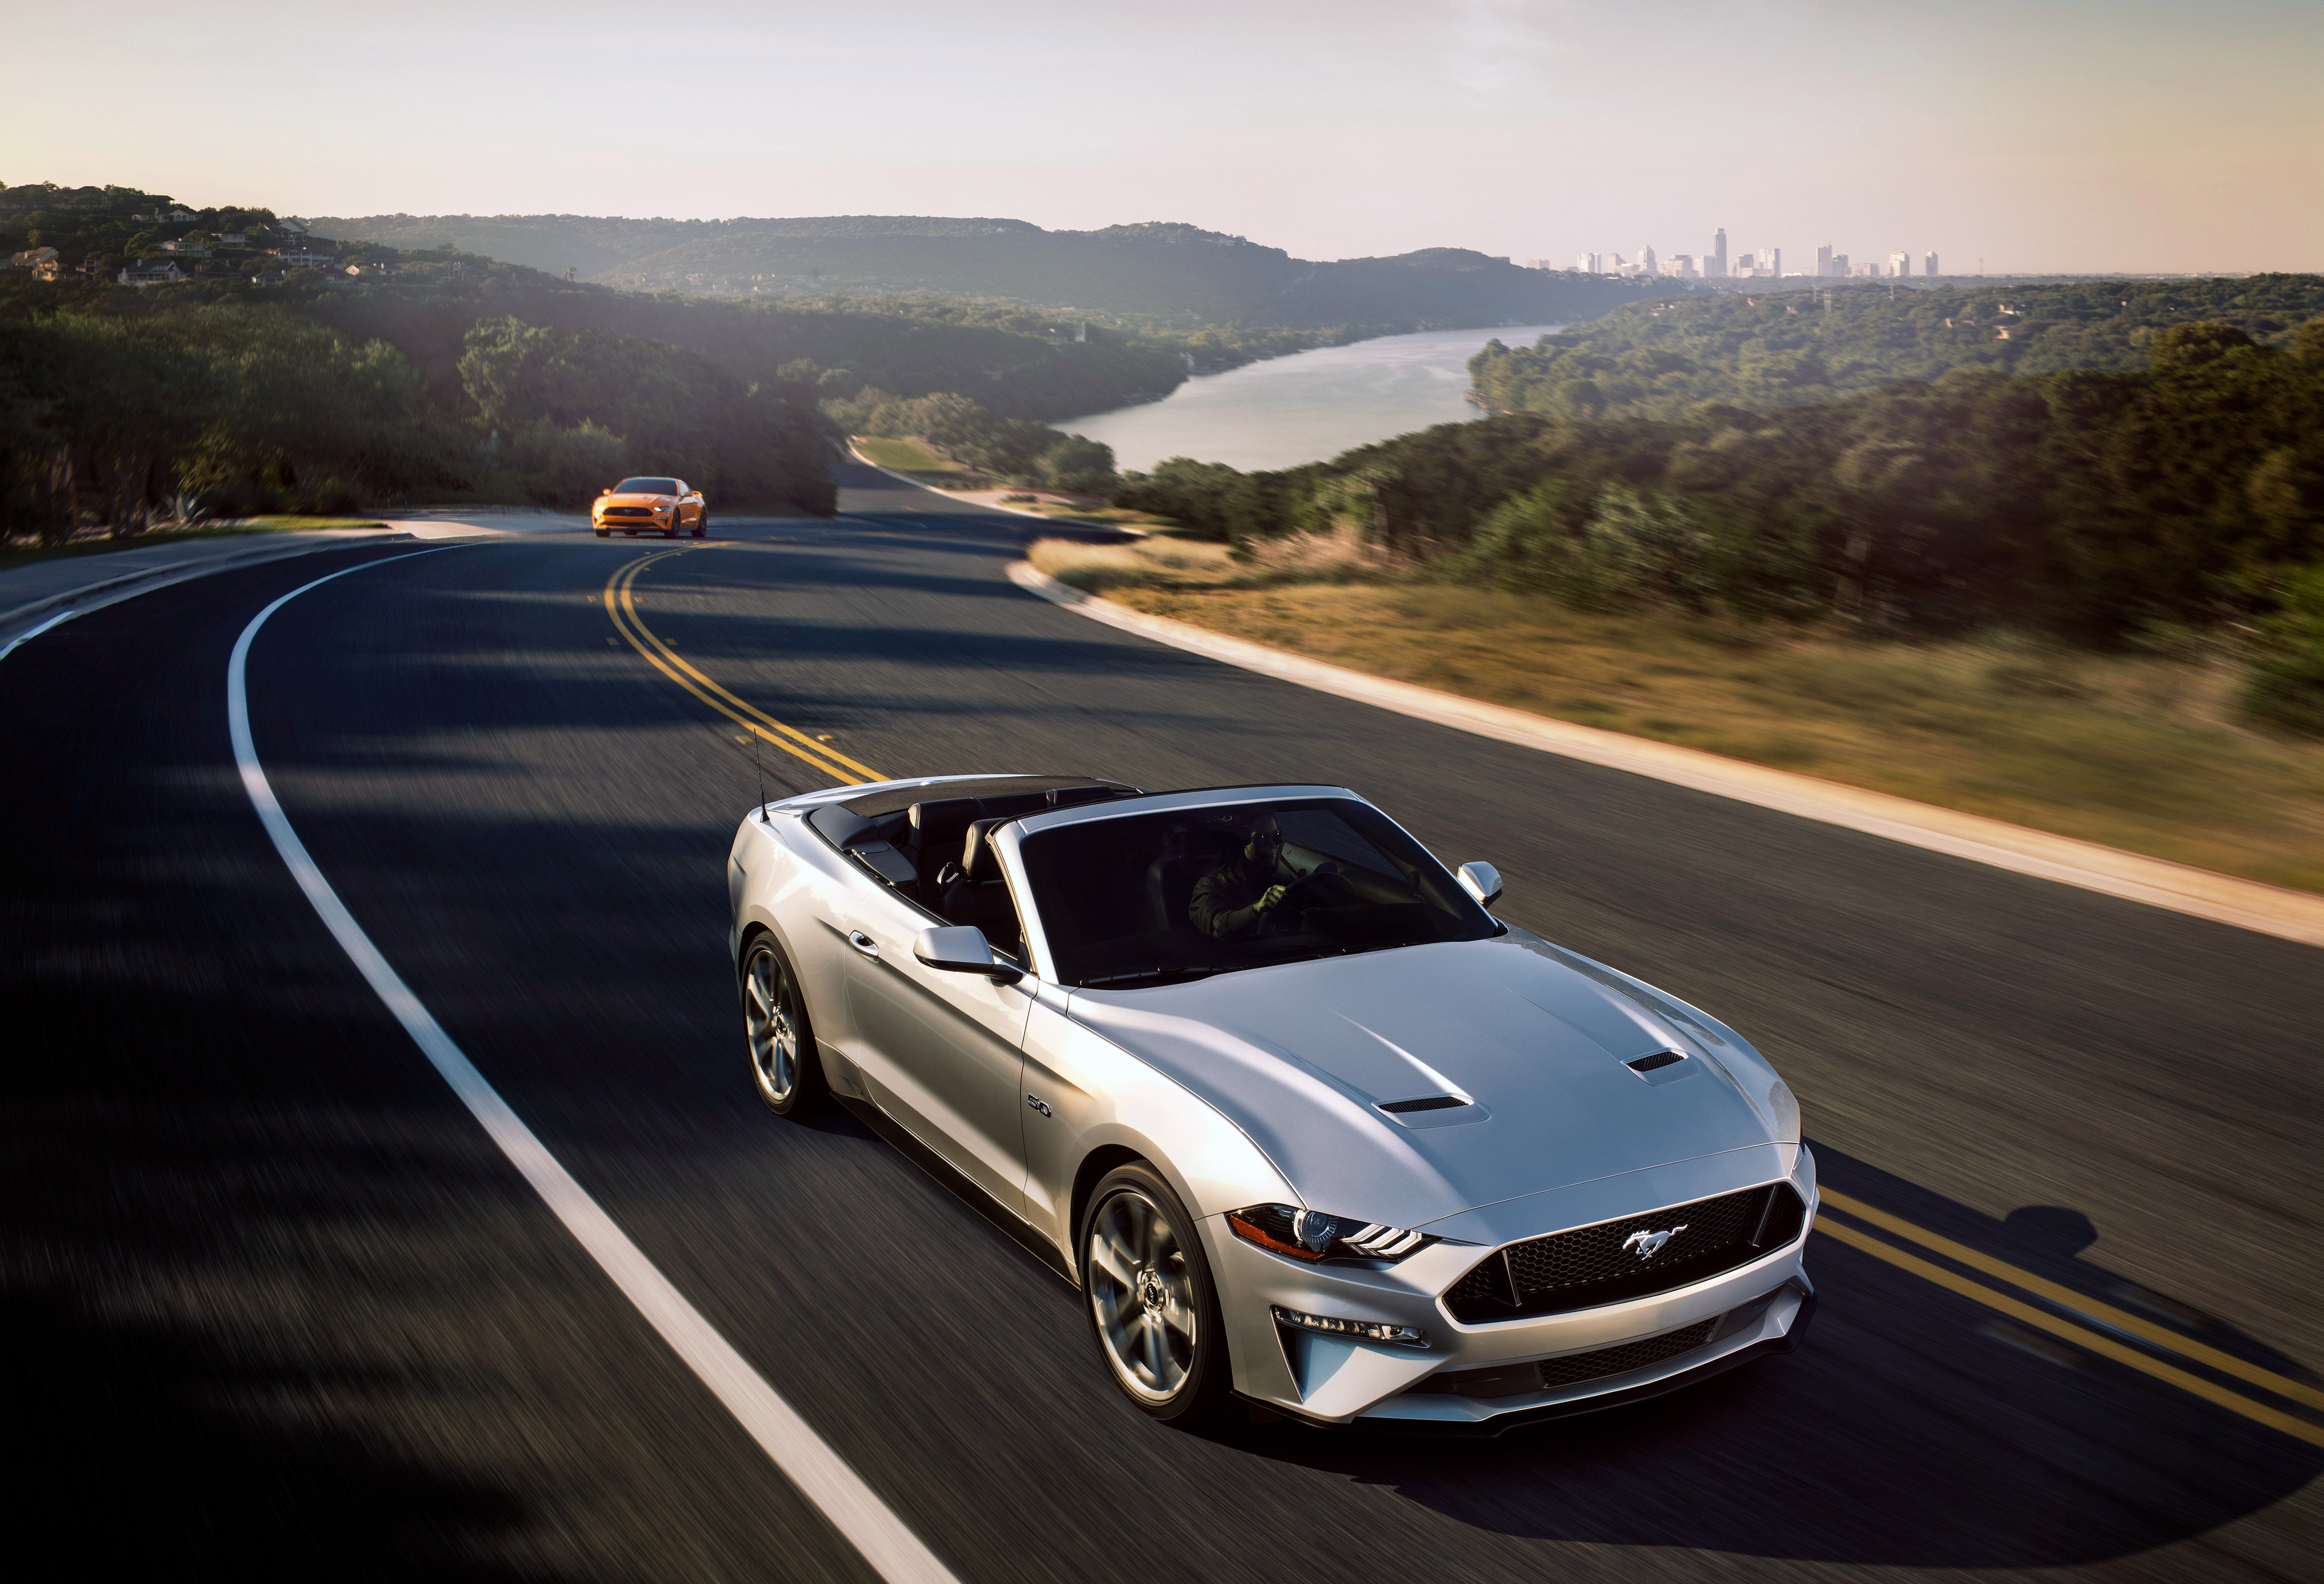 Ford Mustang Convertible cabriolet photo